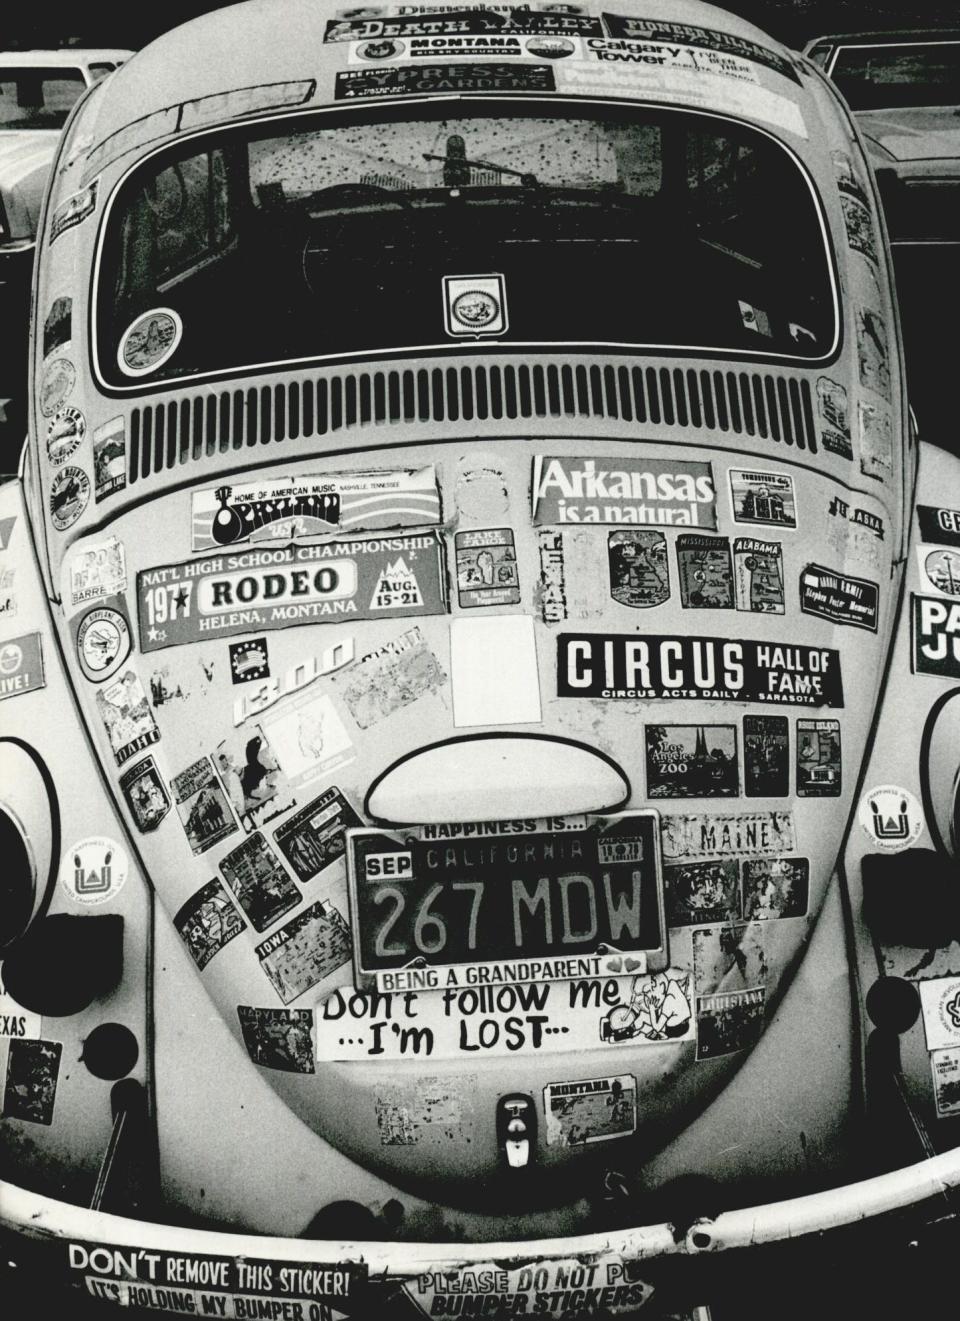 An automobile photographed in 1978 at the state Capitol is covered with stickers beyond just the bumper. Opryland, Arkansas, Maine and other states are represented along with a hodgepodge of other decals.